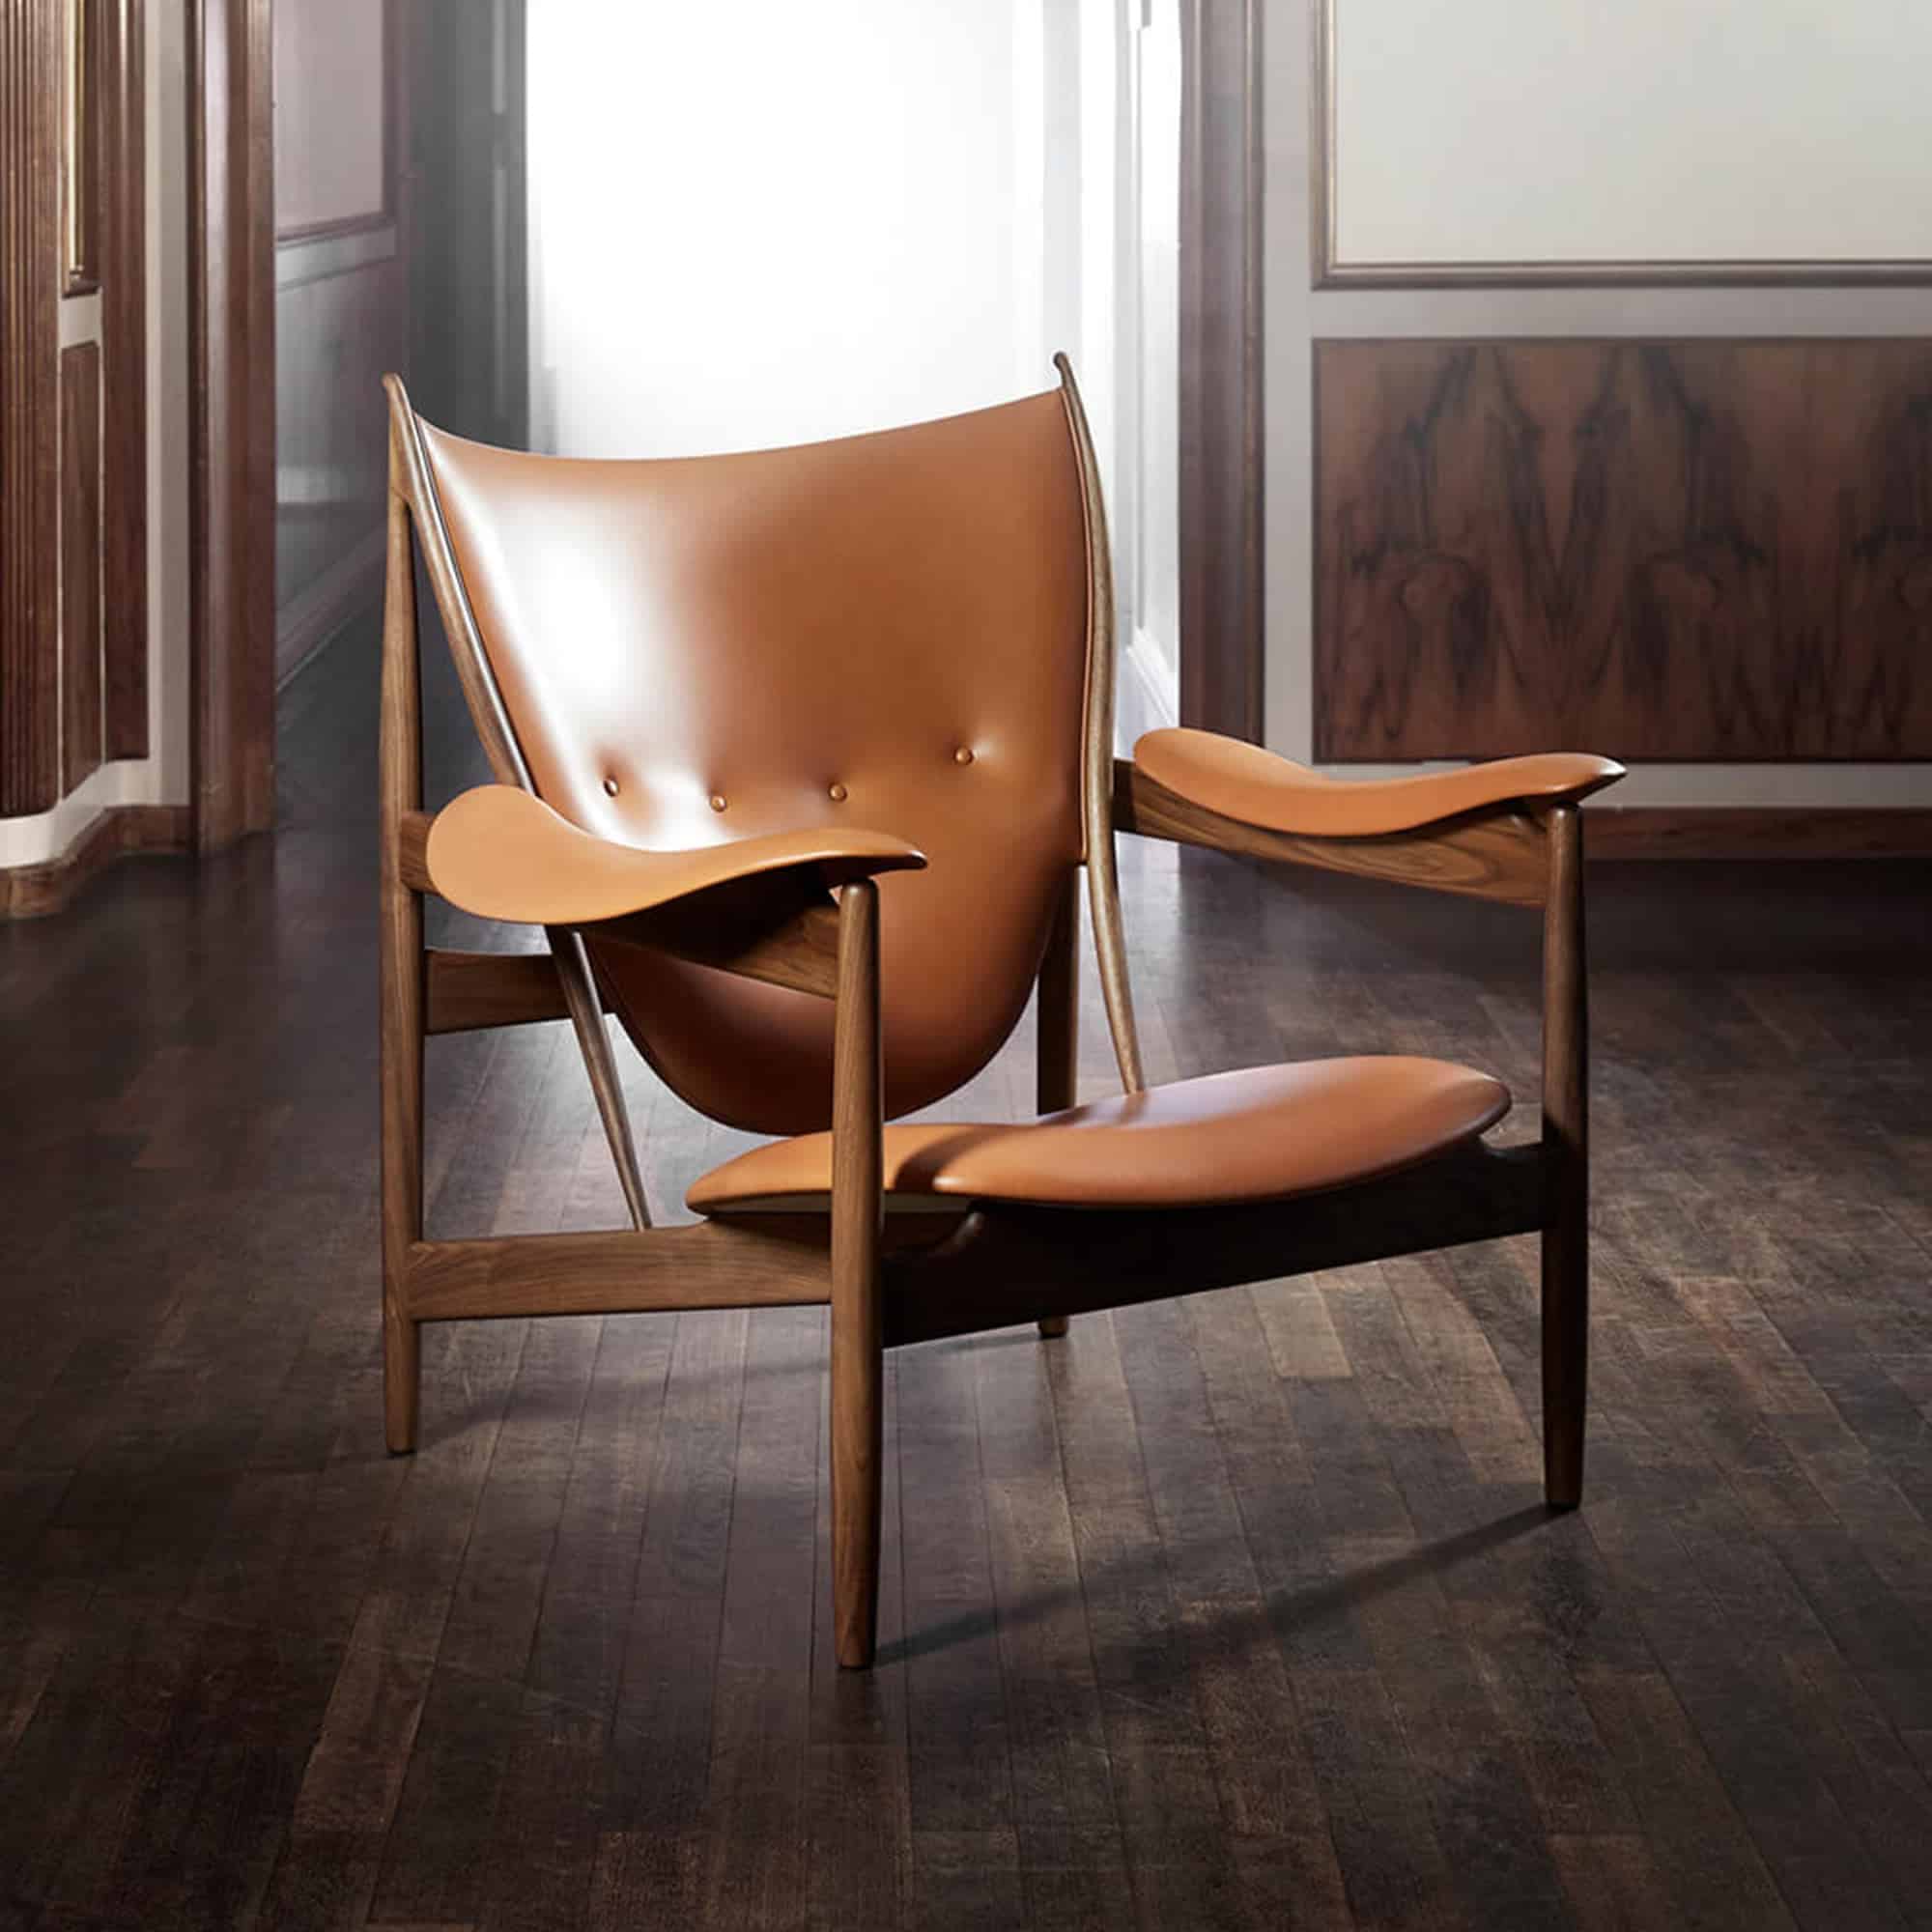 Chieftain Chair Replica - Experience regal comfort with this mid-century modern masterpiece - Organic walnut frame and soft leather upholstery - Timeless statement piece for any interior space.